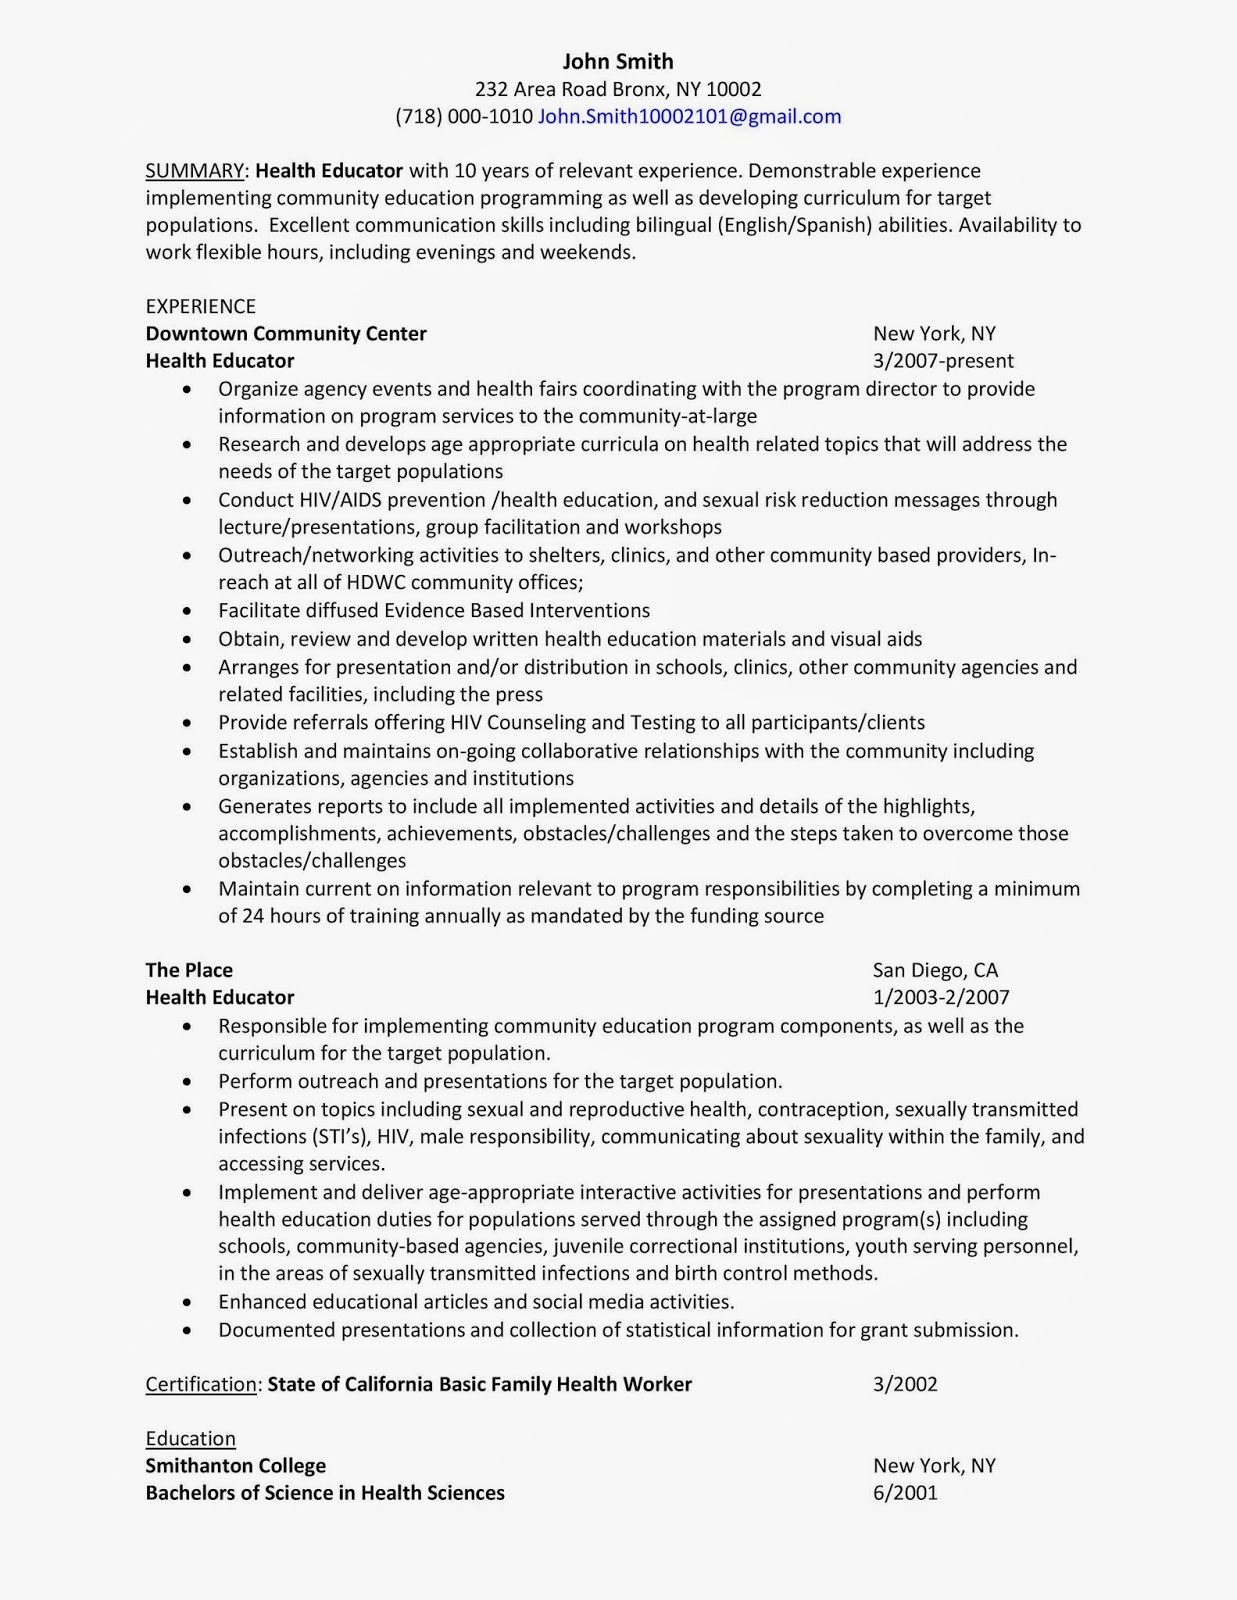 Sample Resume for Health Education Specialist Health Educator: Sample Resume Career Advice & Pro Wrestling …